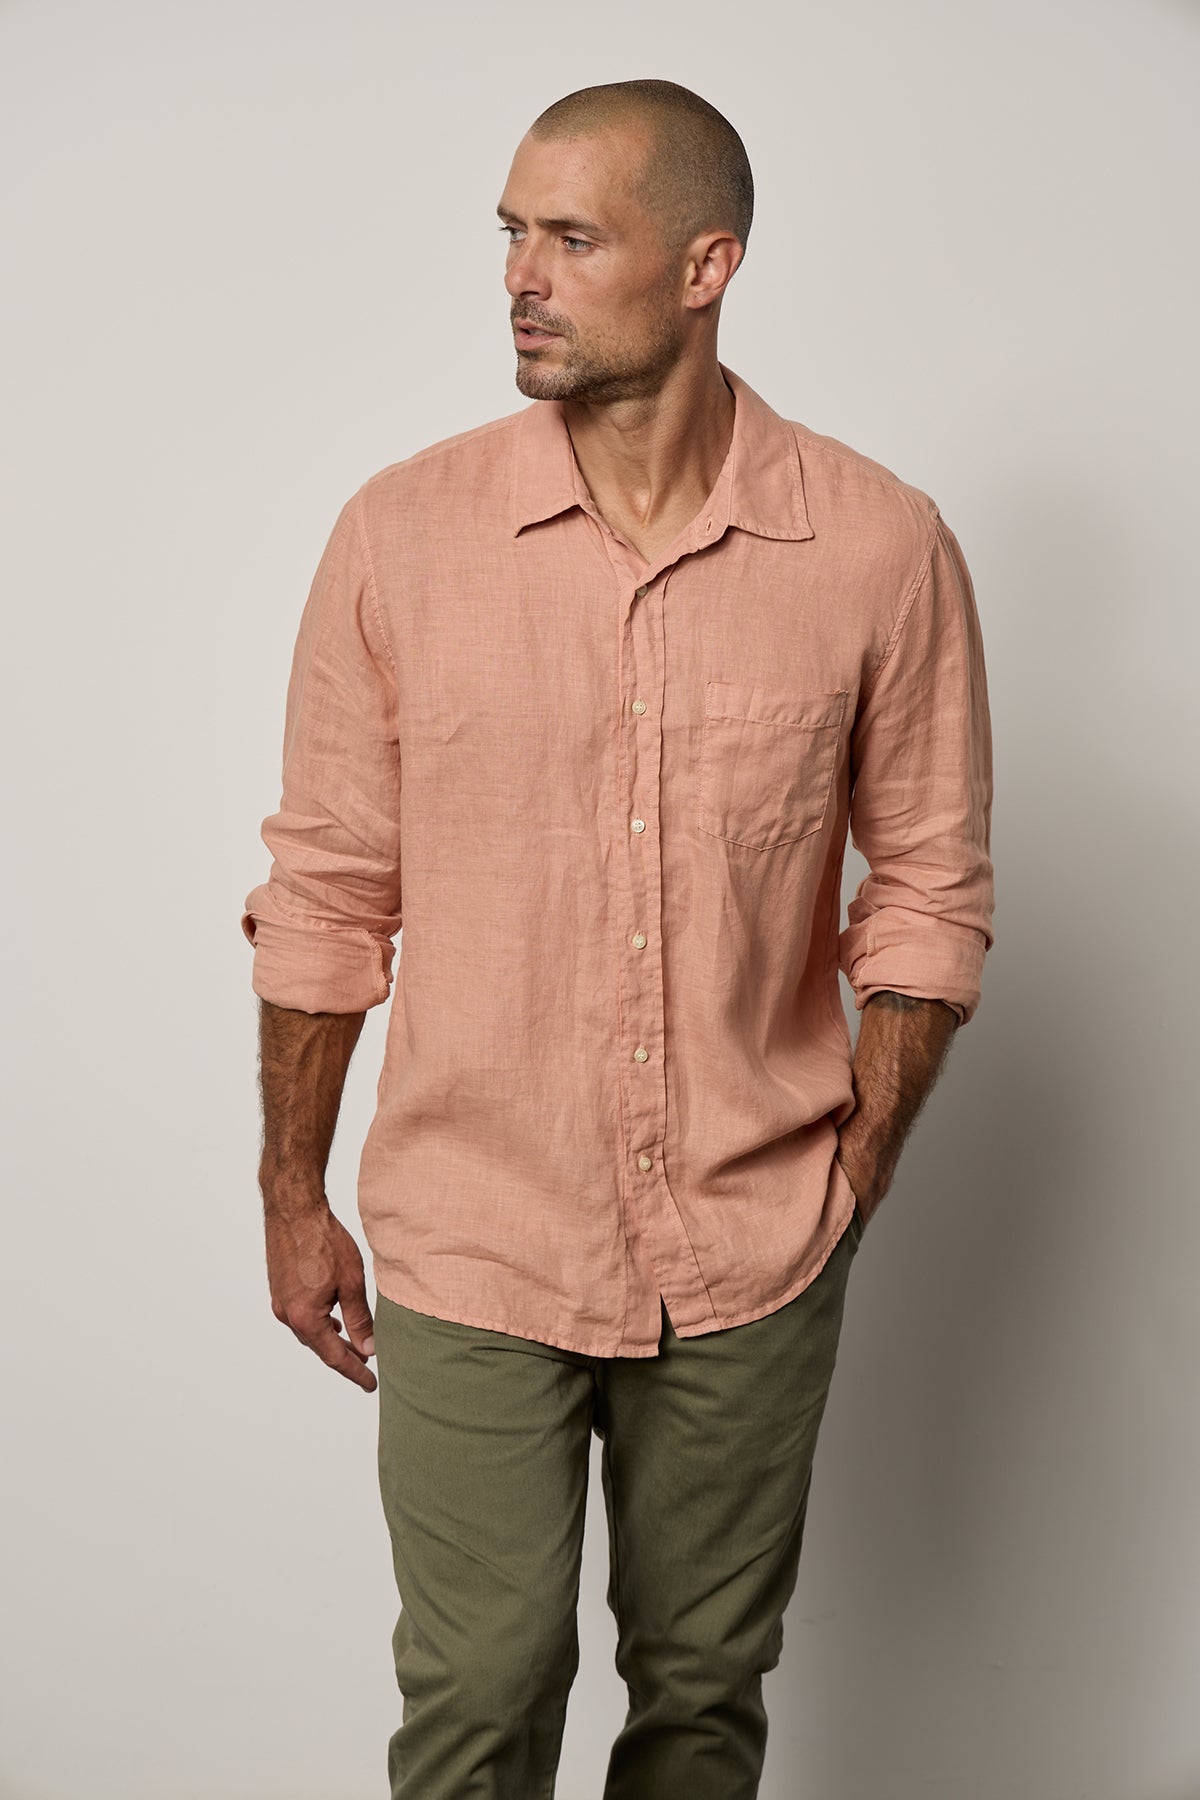 Benton Button-Up Shirt in bronze linen sleeves rolled front, model hand in pant pocket-35955069092033